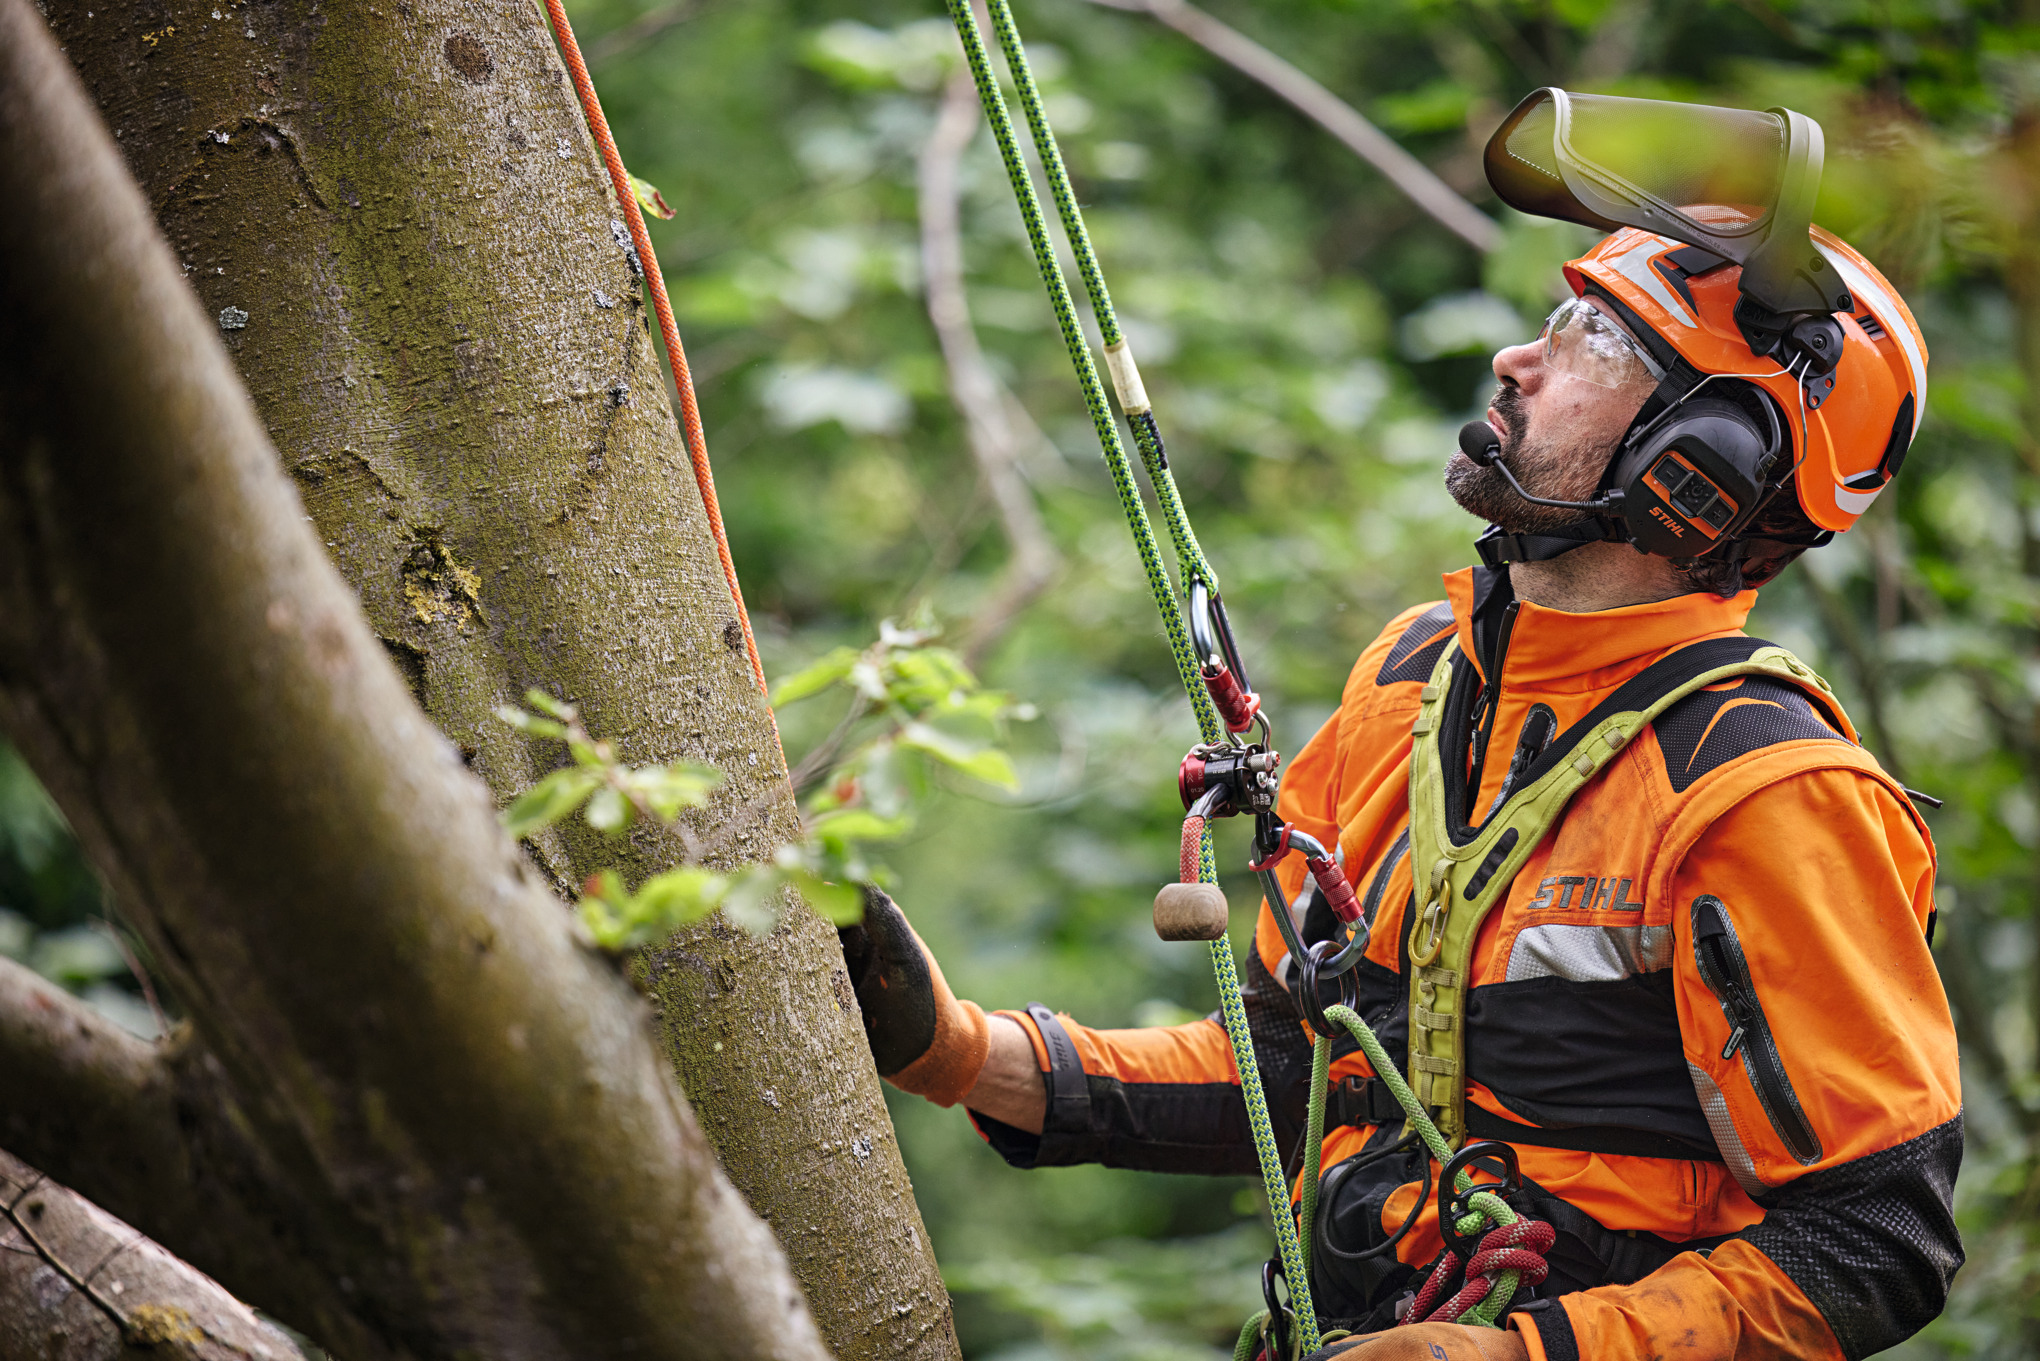 An arboriculture professional is suspended from a deciduous tree using a safety harness.